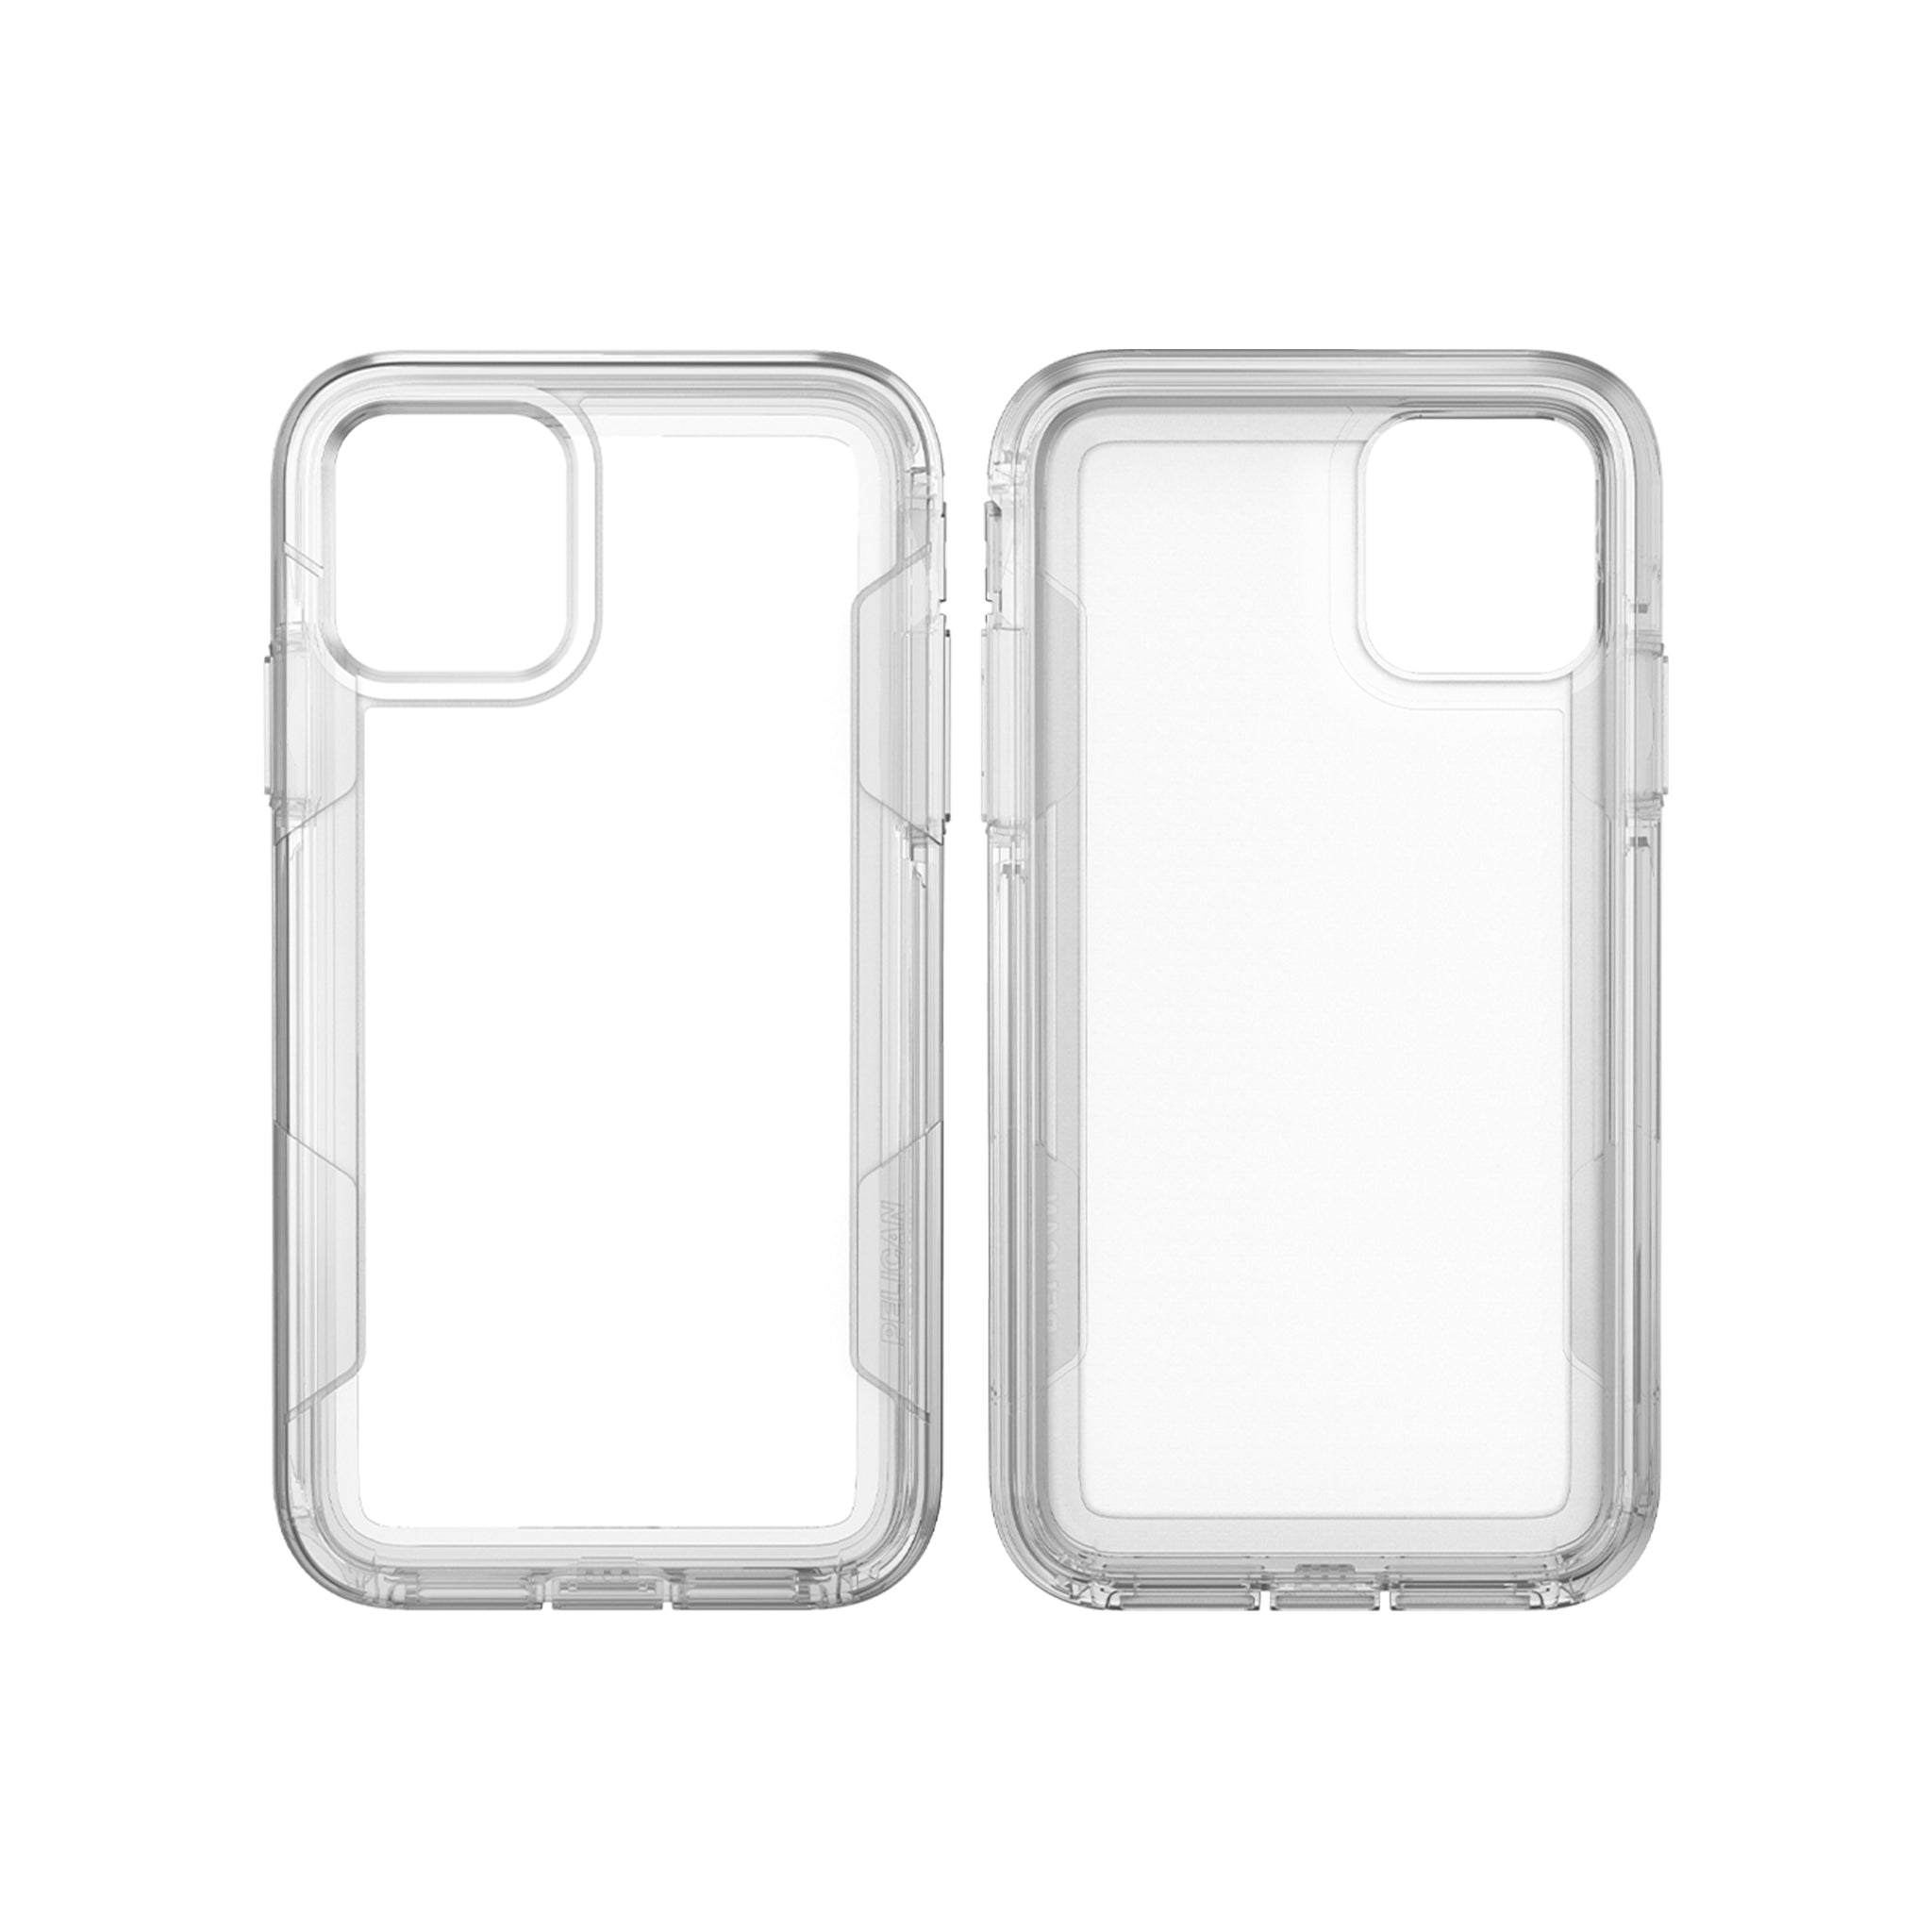 Pelican - Voyager Case For Apple iPhone 11 Pro Max / Xs Max - Clear